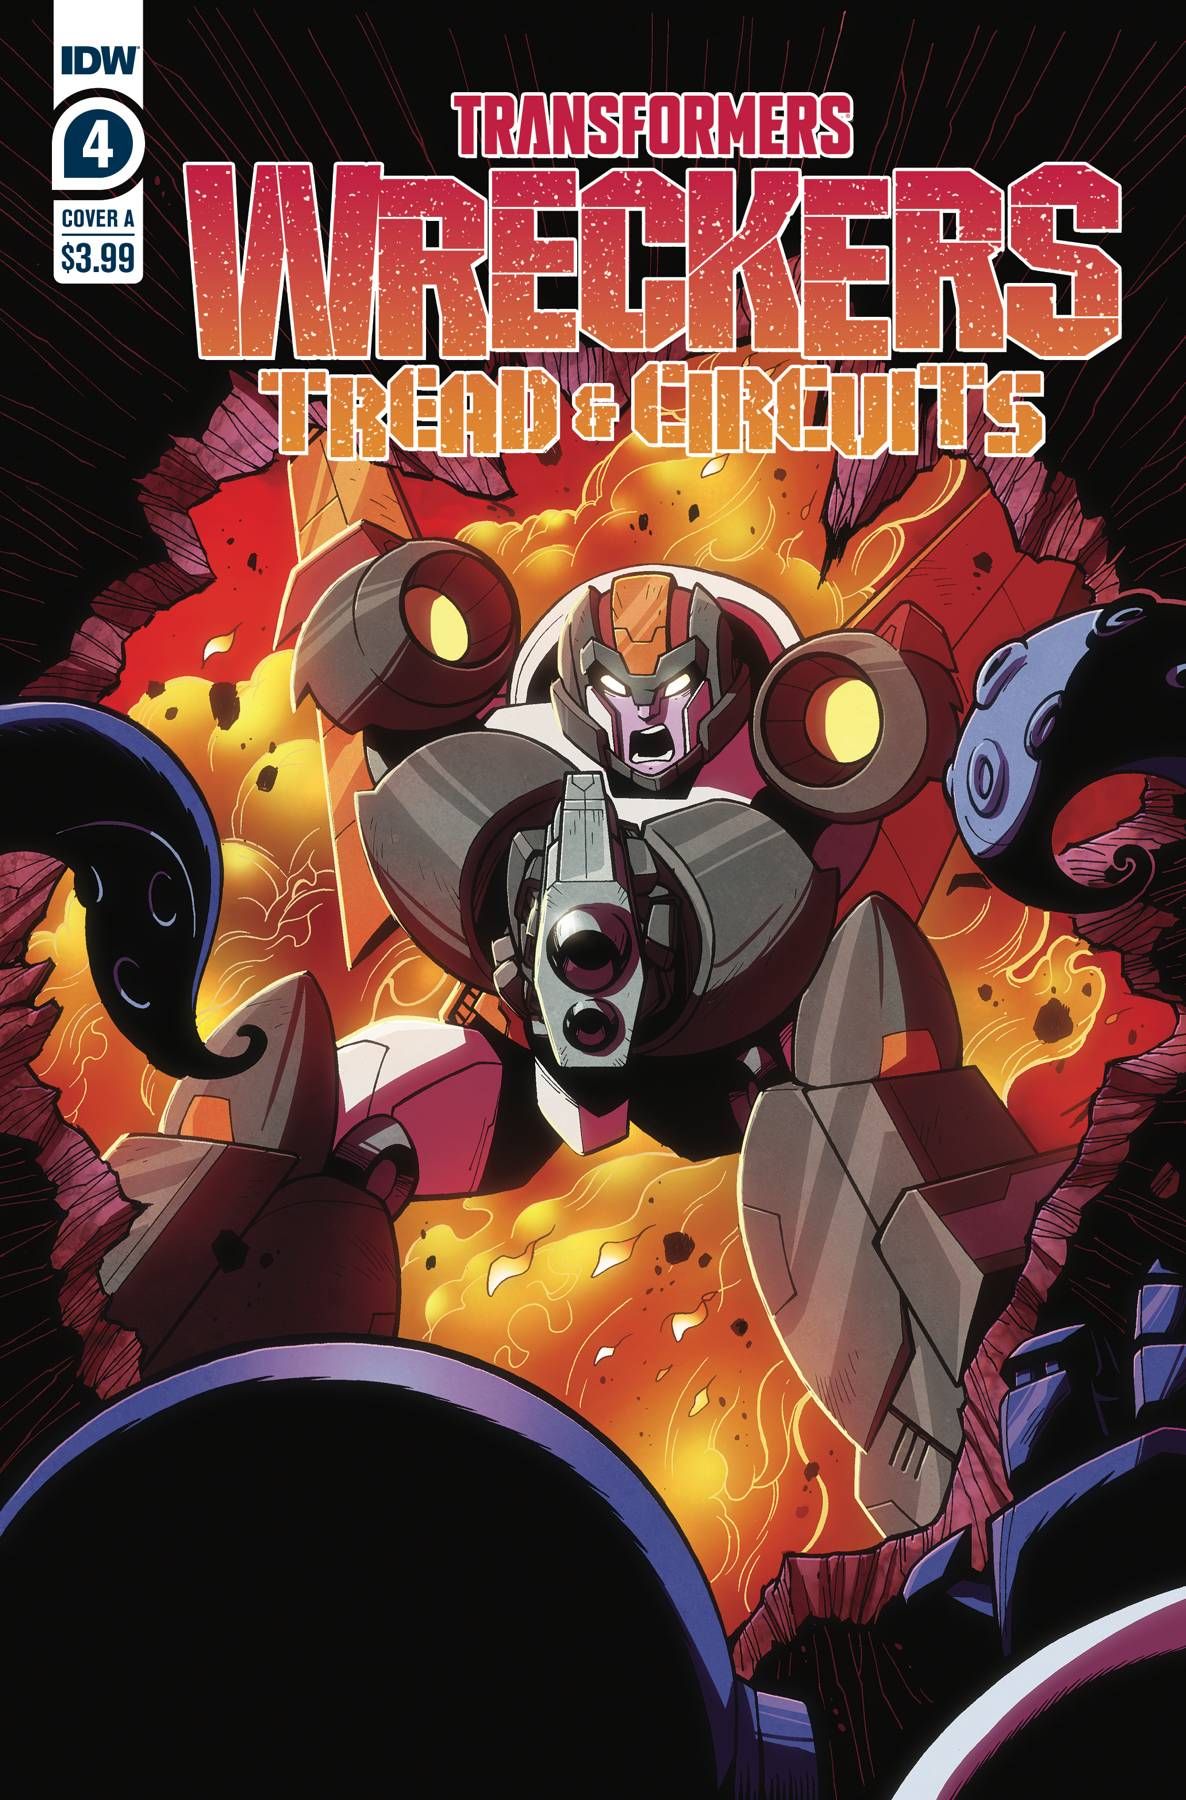 Transformers: Wreckers - Tread and Circuits #4 Comic